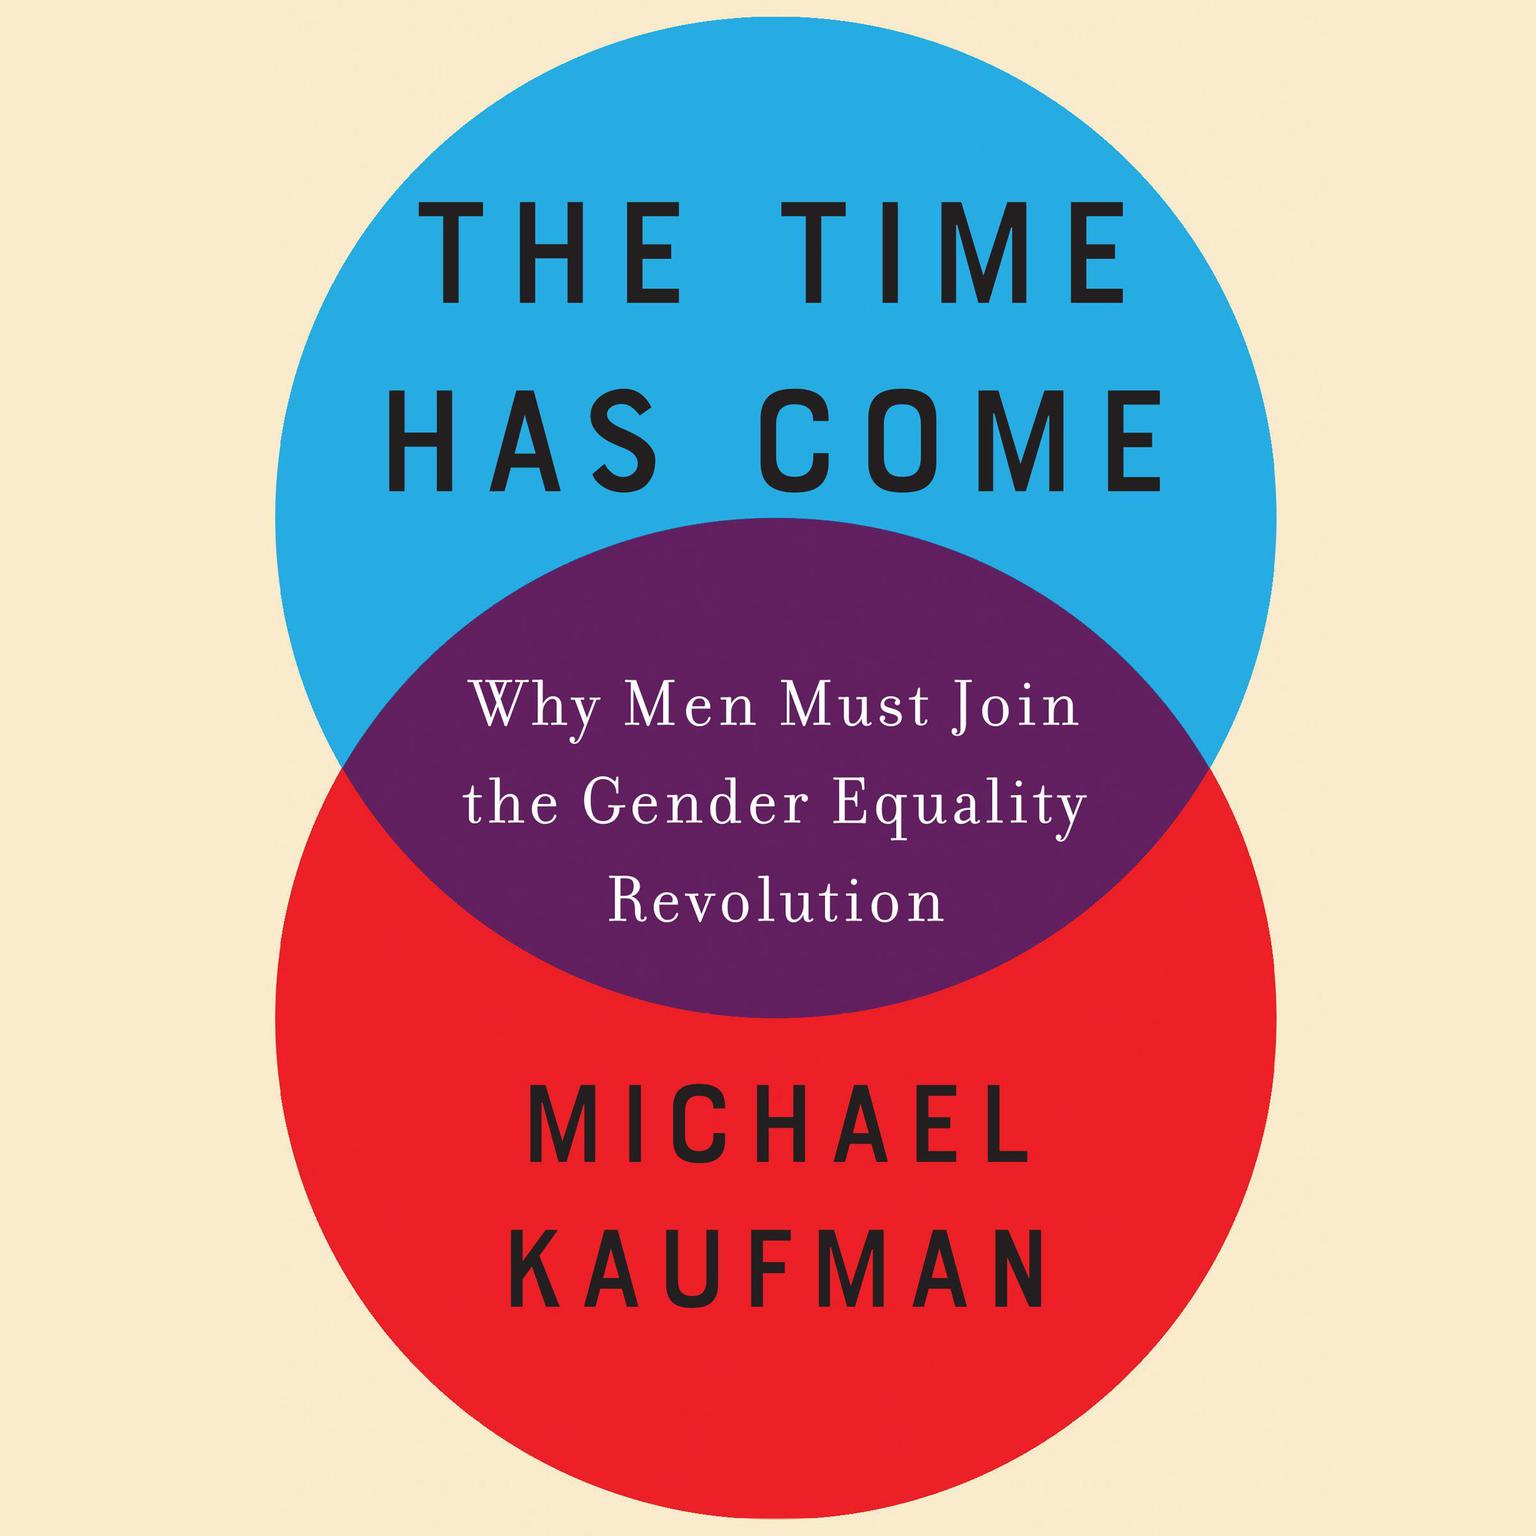 The Time Has Come: Why Men Must Join the Gender Equality Revolution Audiobook, by Michael Kaufman